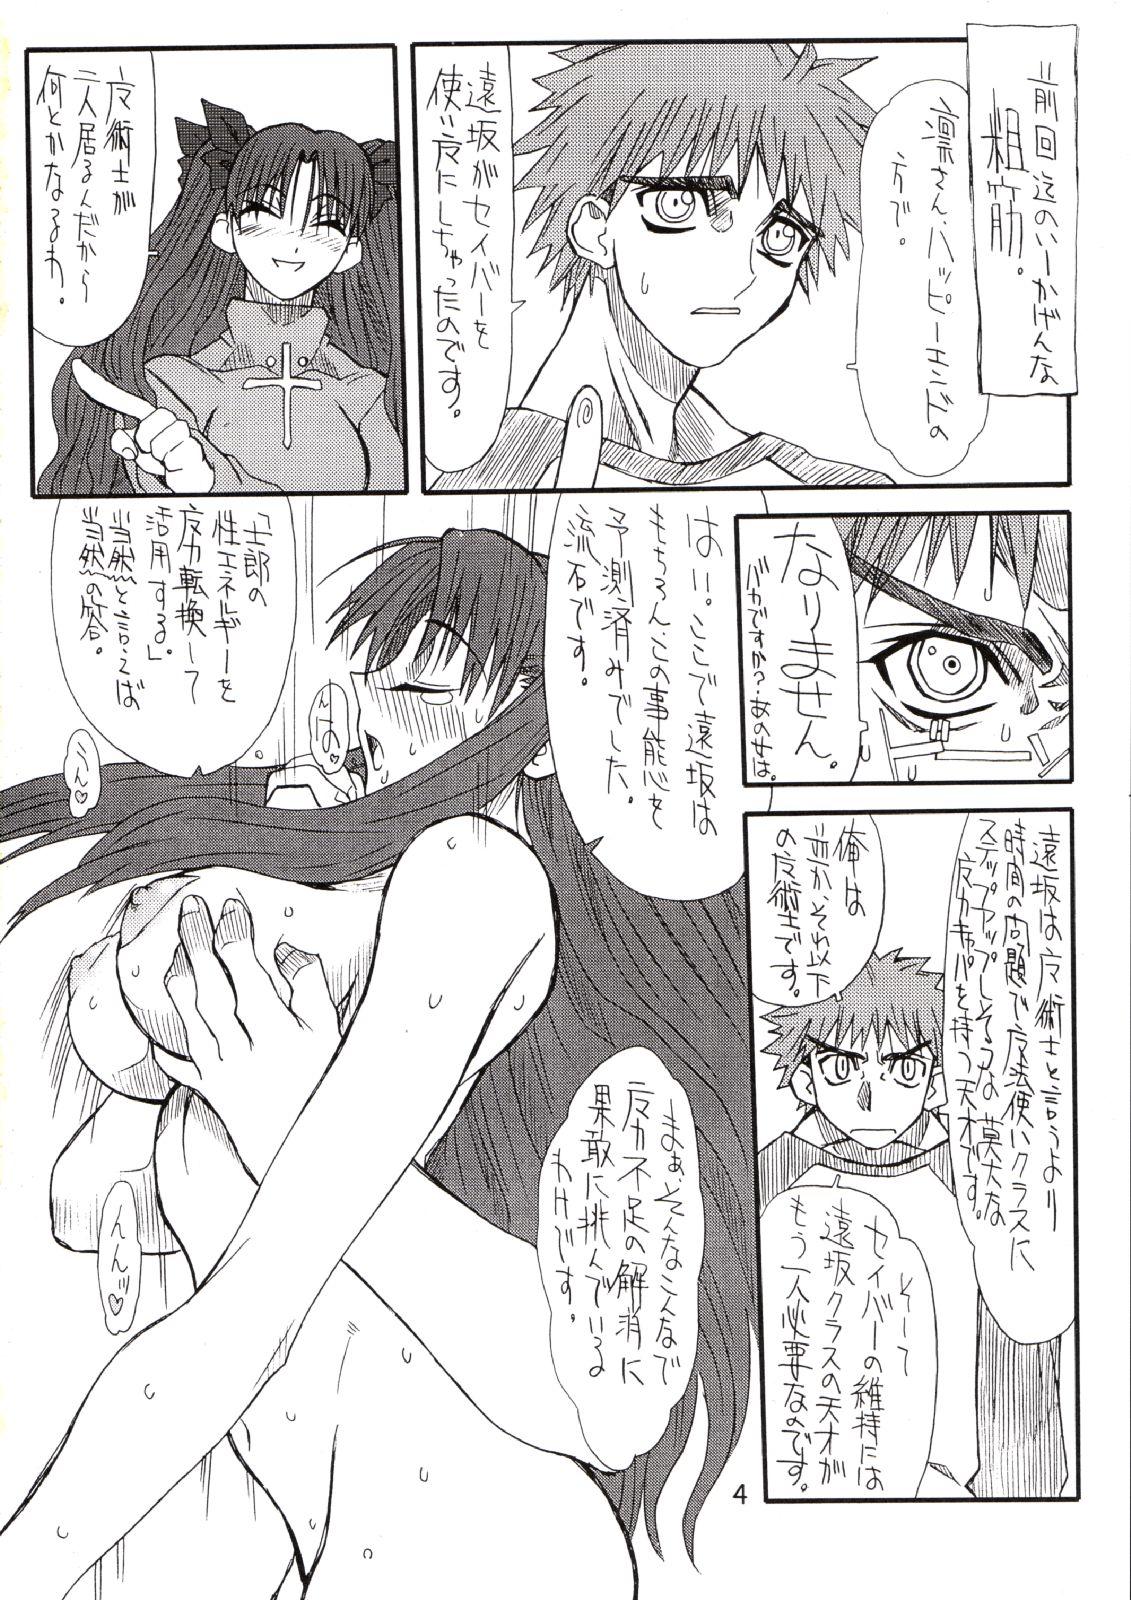 Transex Corn 2 - Fate stay night Strap On - Page 3